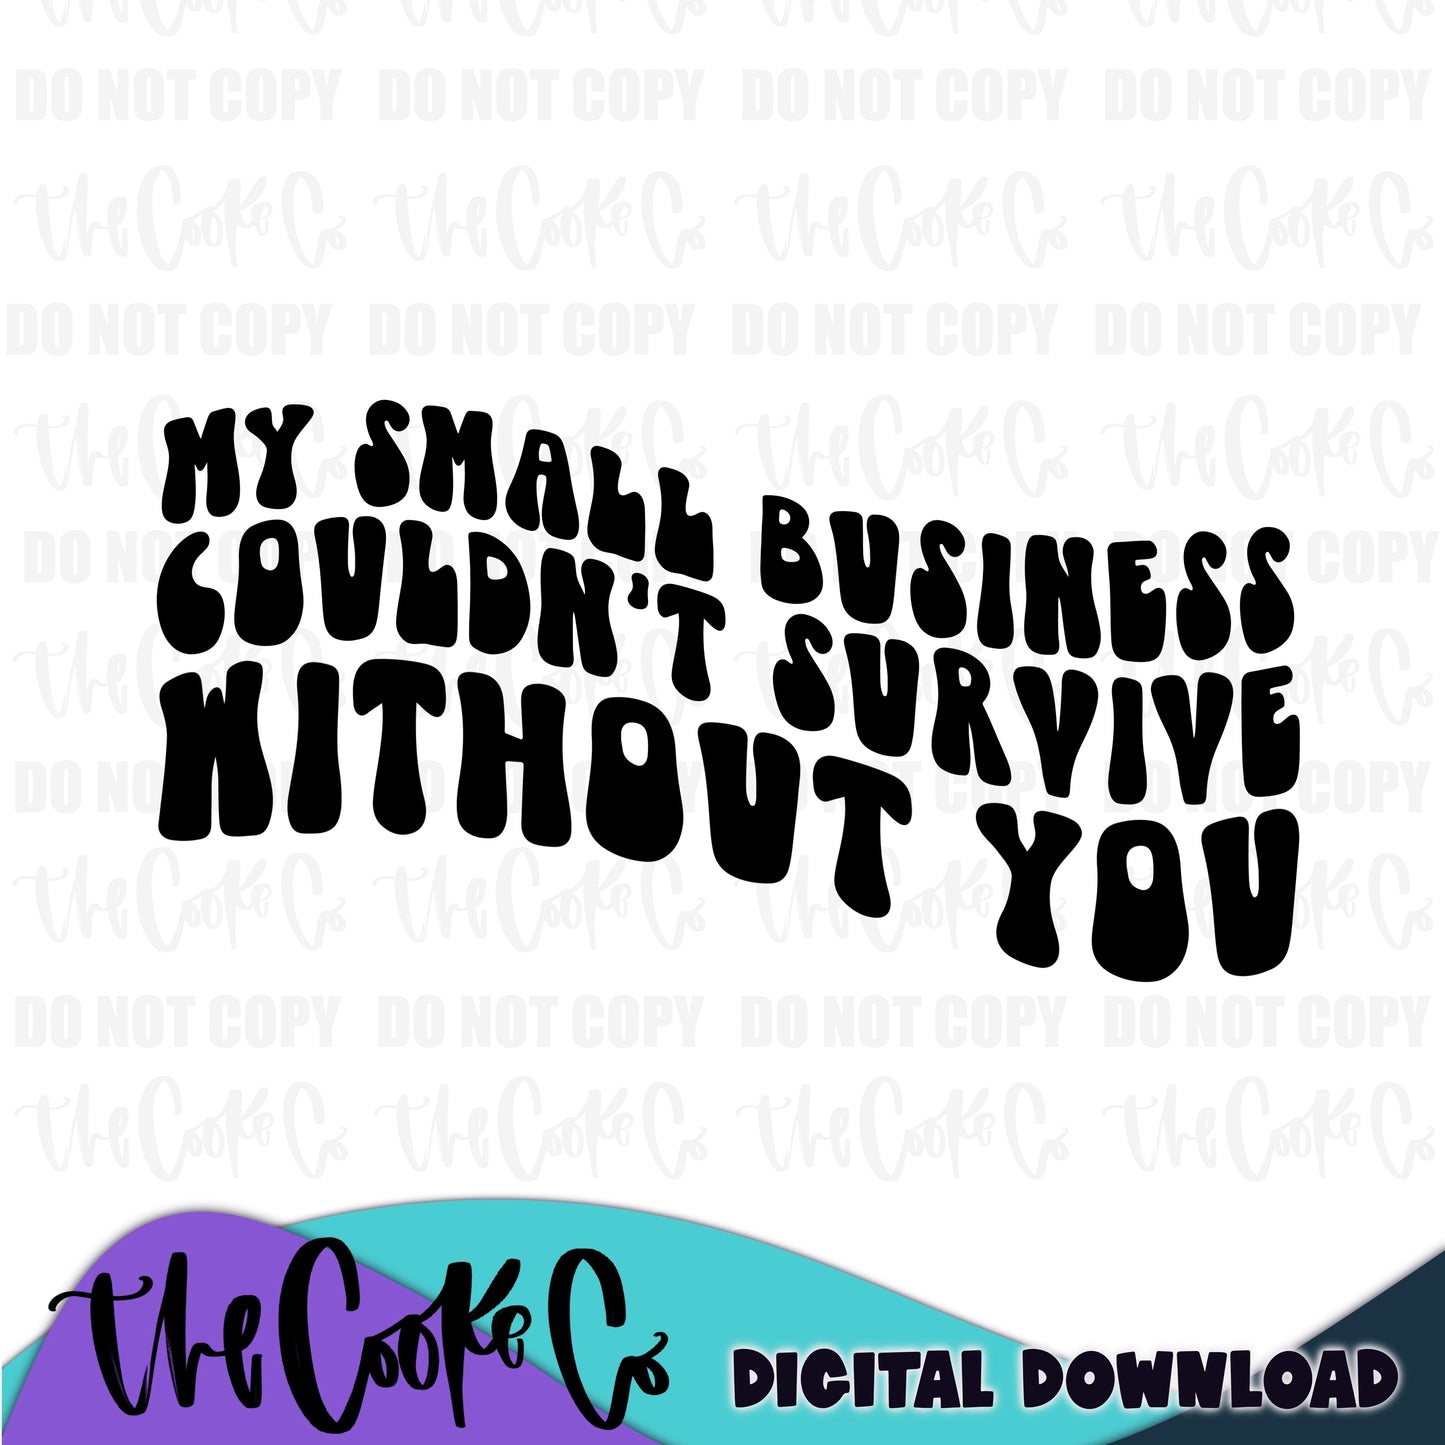 MY SMALL BUSINESS COULDN'T SURVIVE WITHOUT YOU | Digital Download | PNG